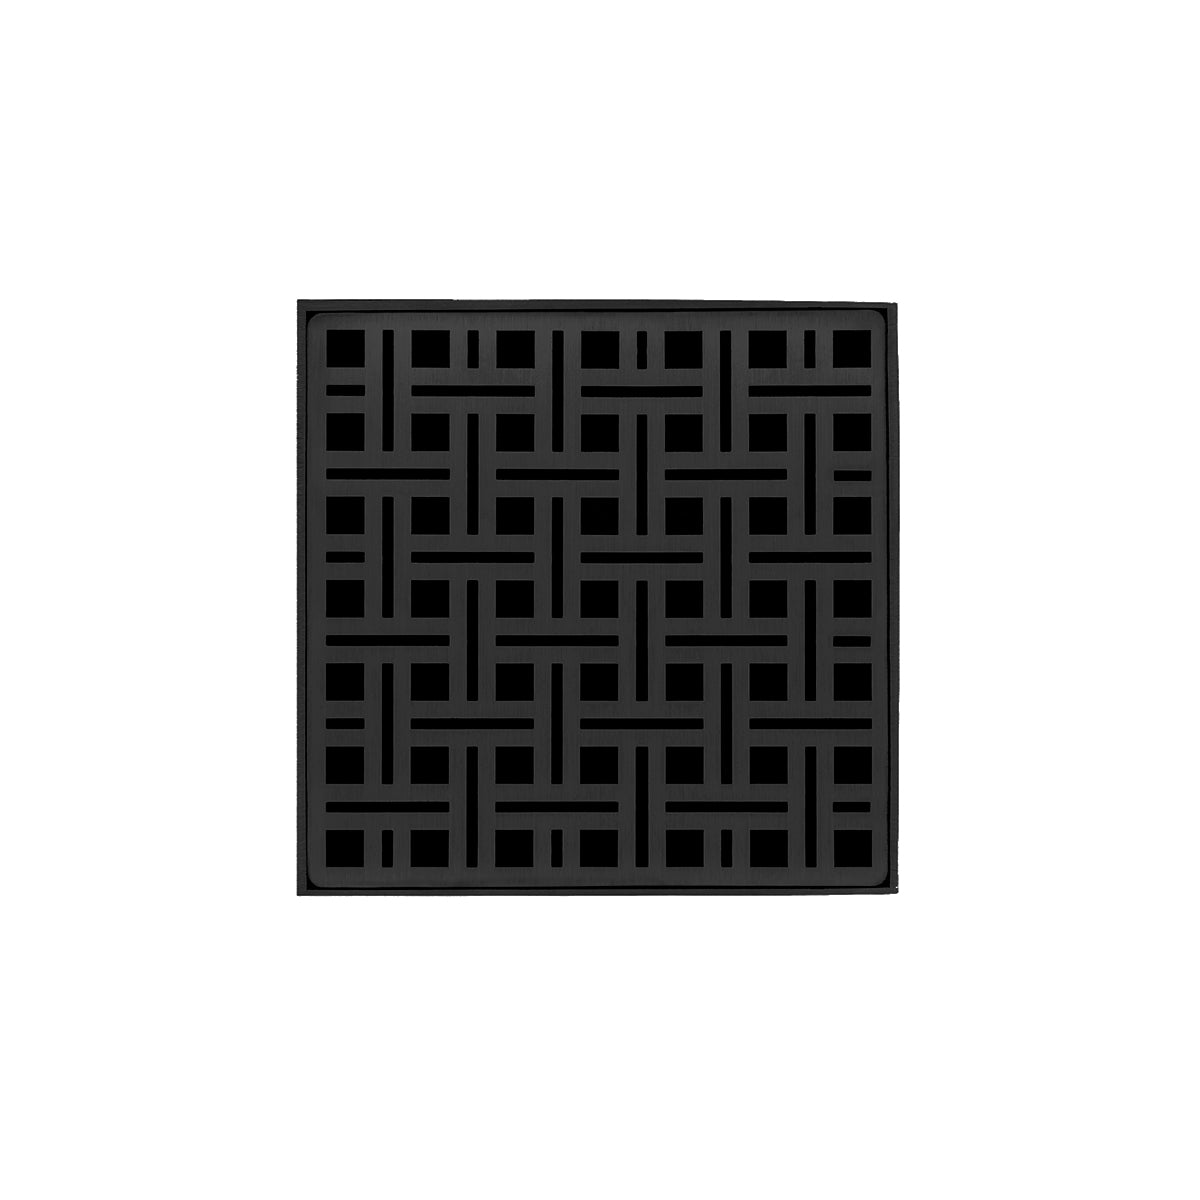 Infinity Drain 5" x 5" VD 5 High Flow Premium Center Drain Kit with Weave Pattern Decorative Plate with PVC Drain Body, 3" Outlet